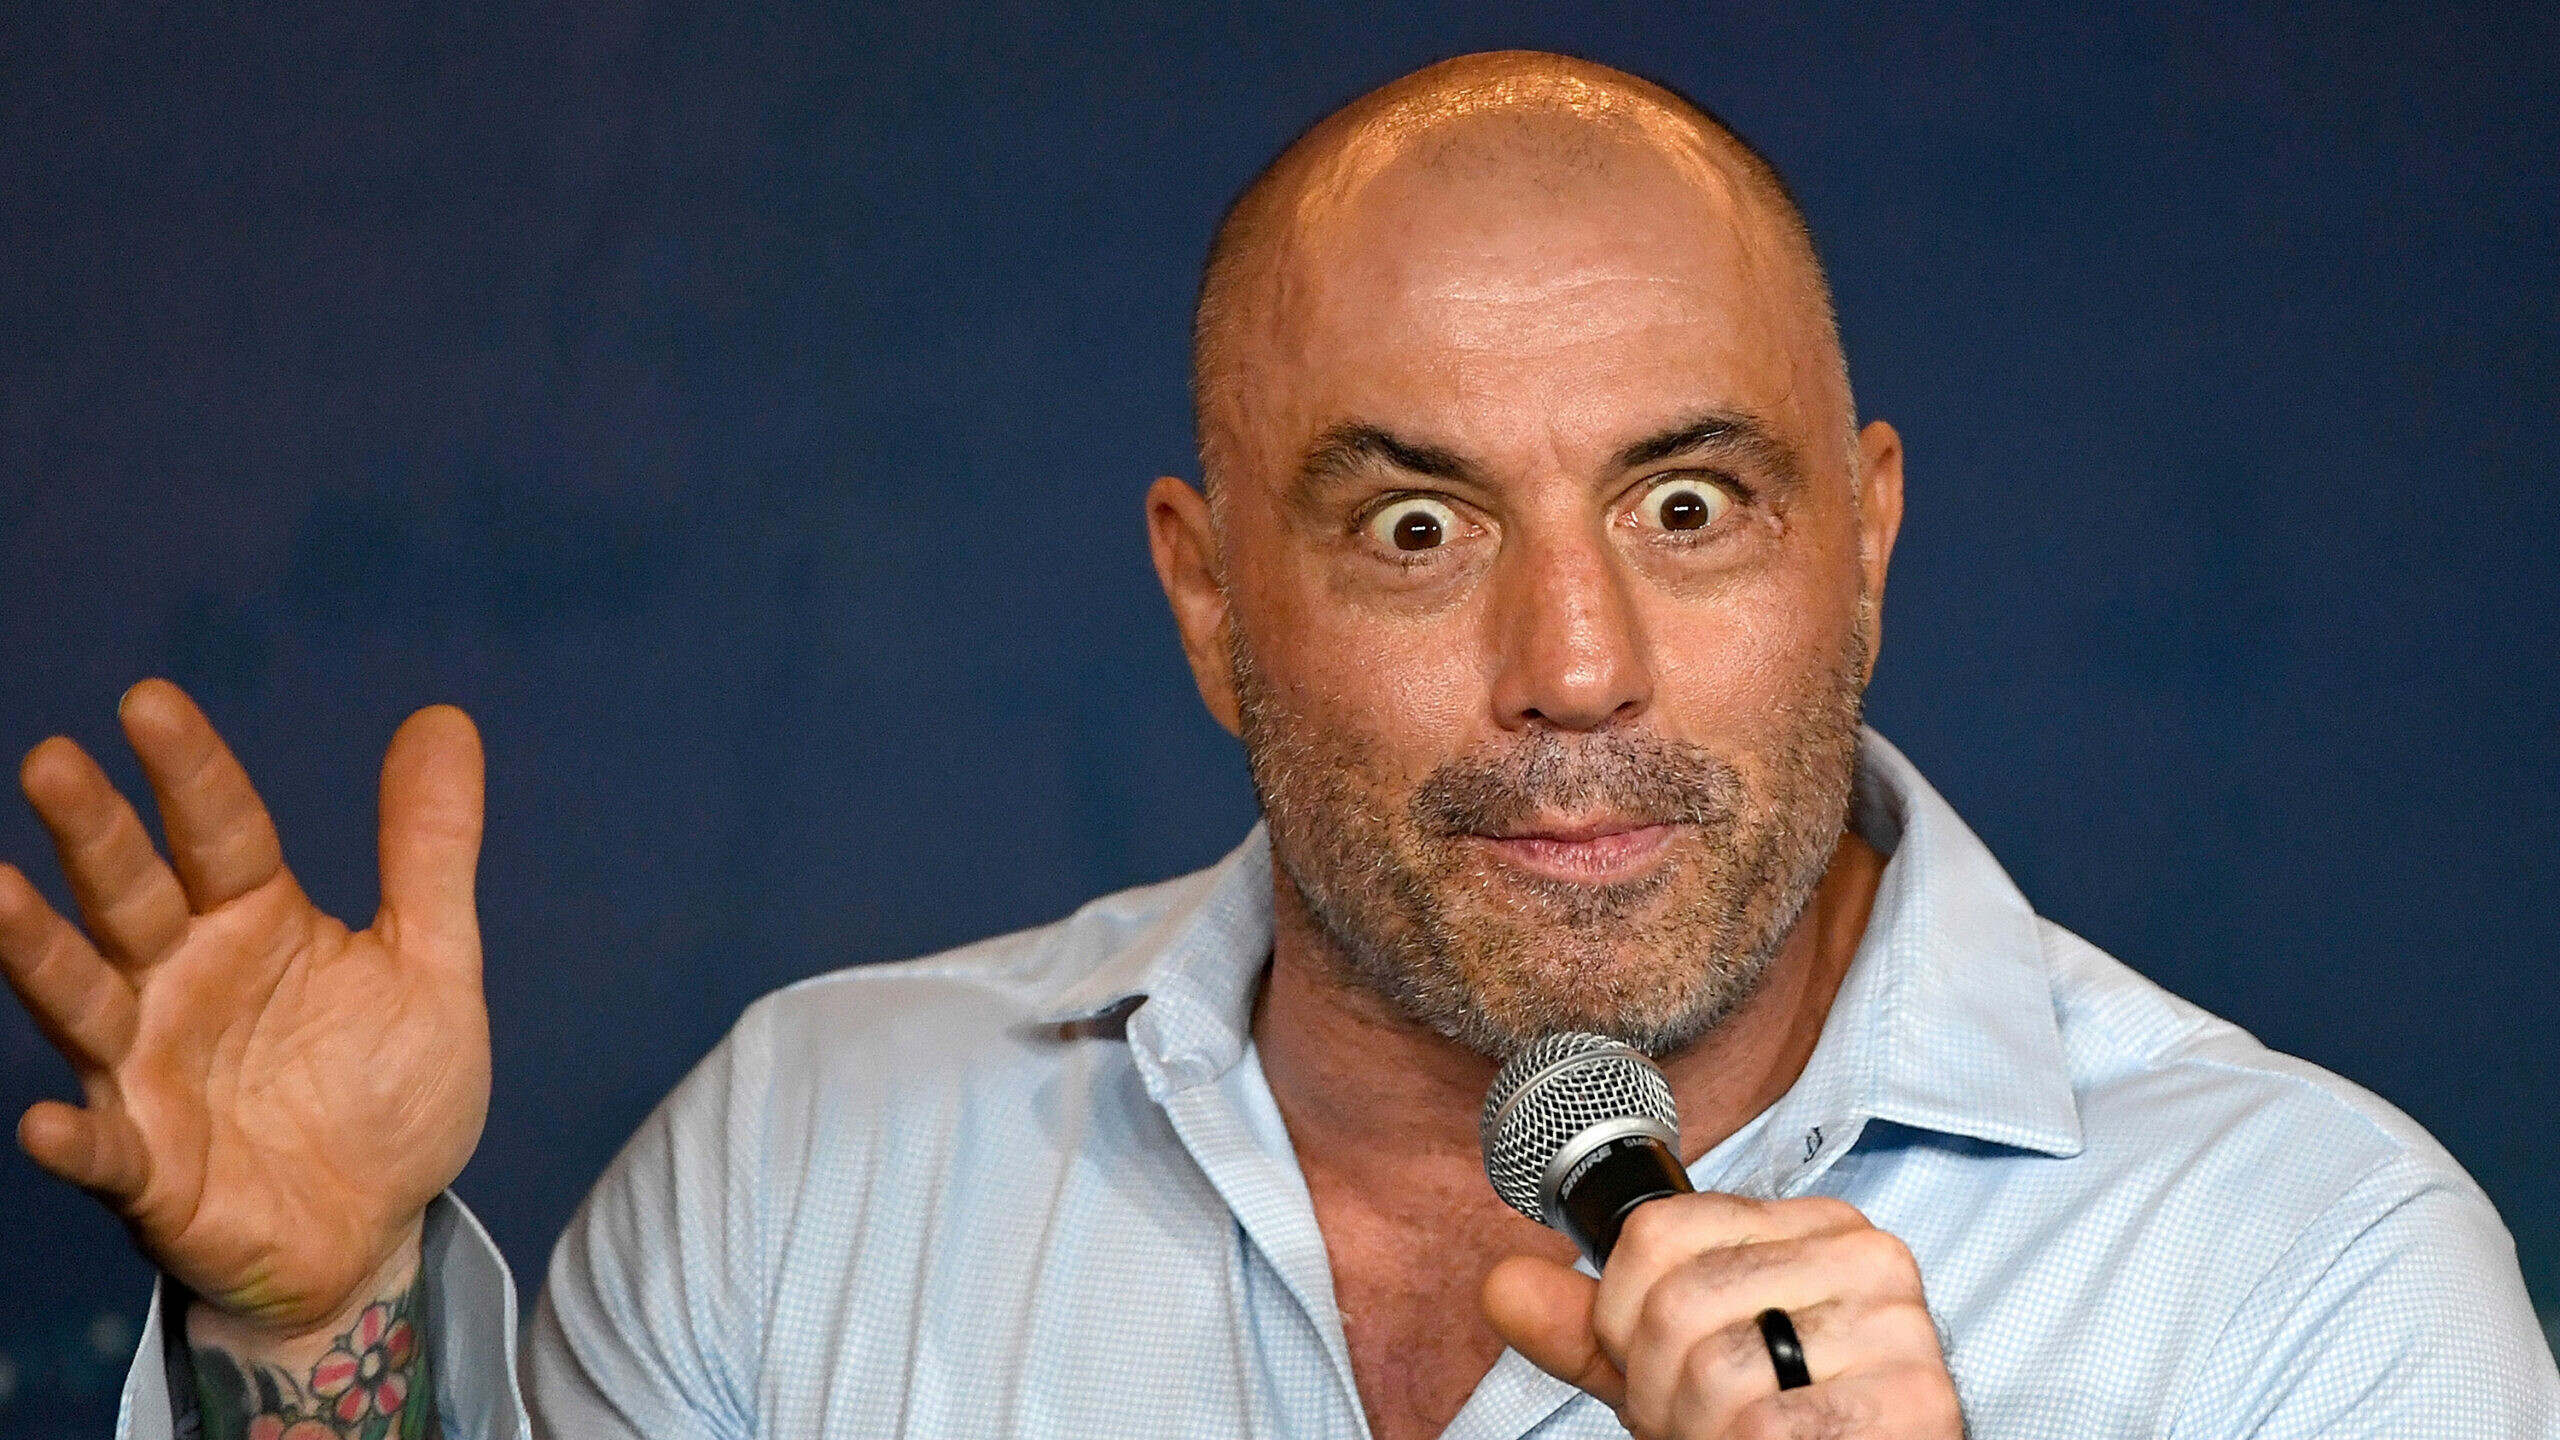 Joe Rogan: Performed first stand-up routine on August 27, 1988, at a Stitches comedy club in Boston. 2560x1440 HD Background.